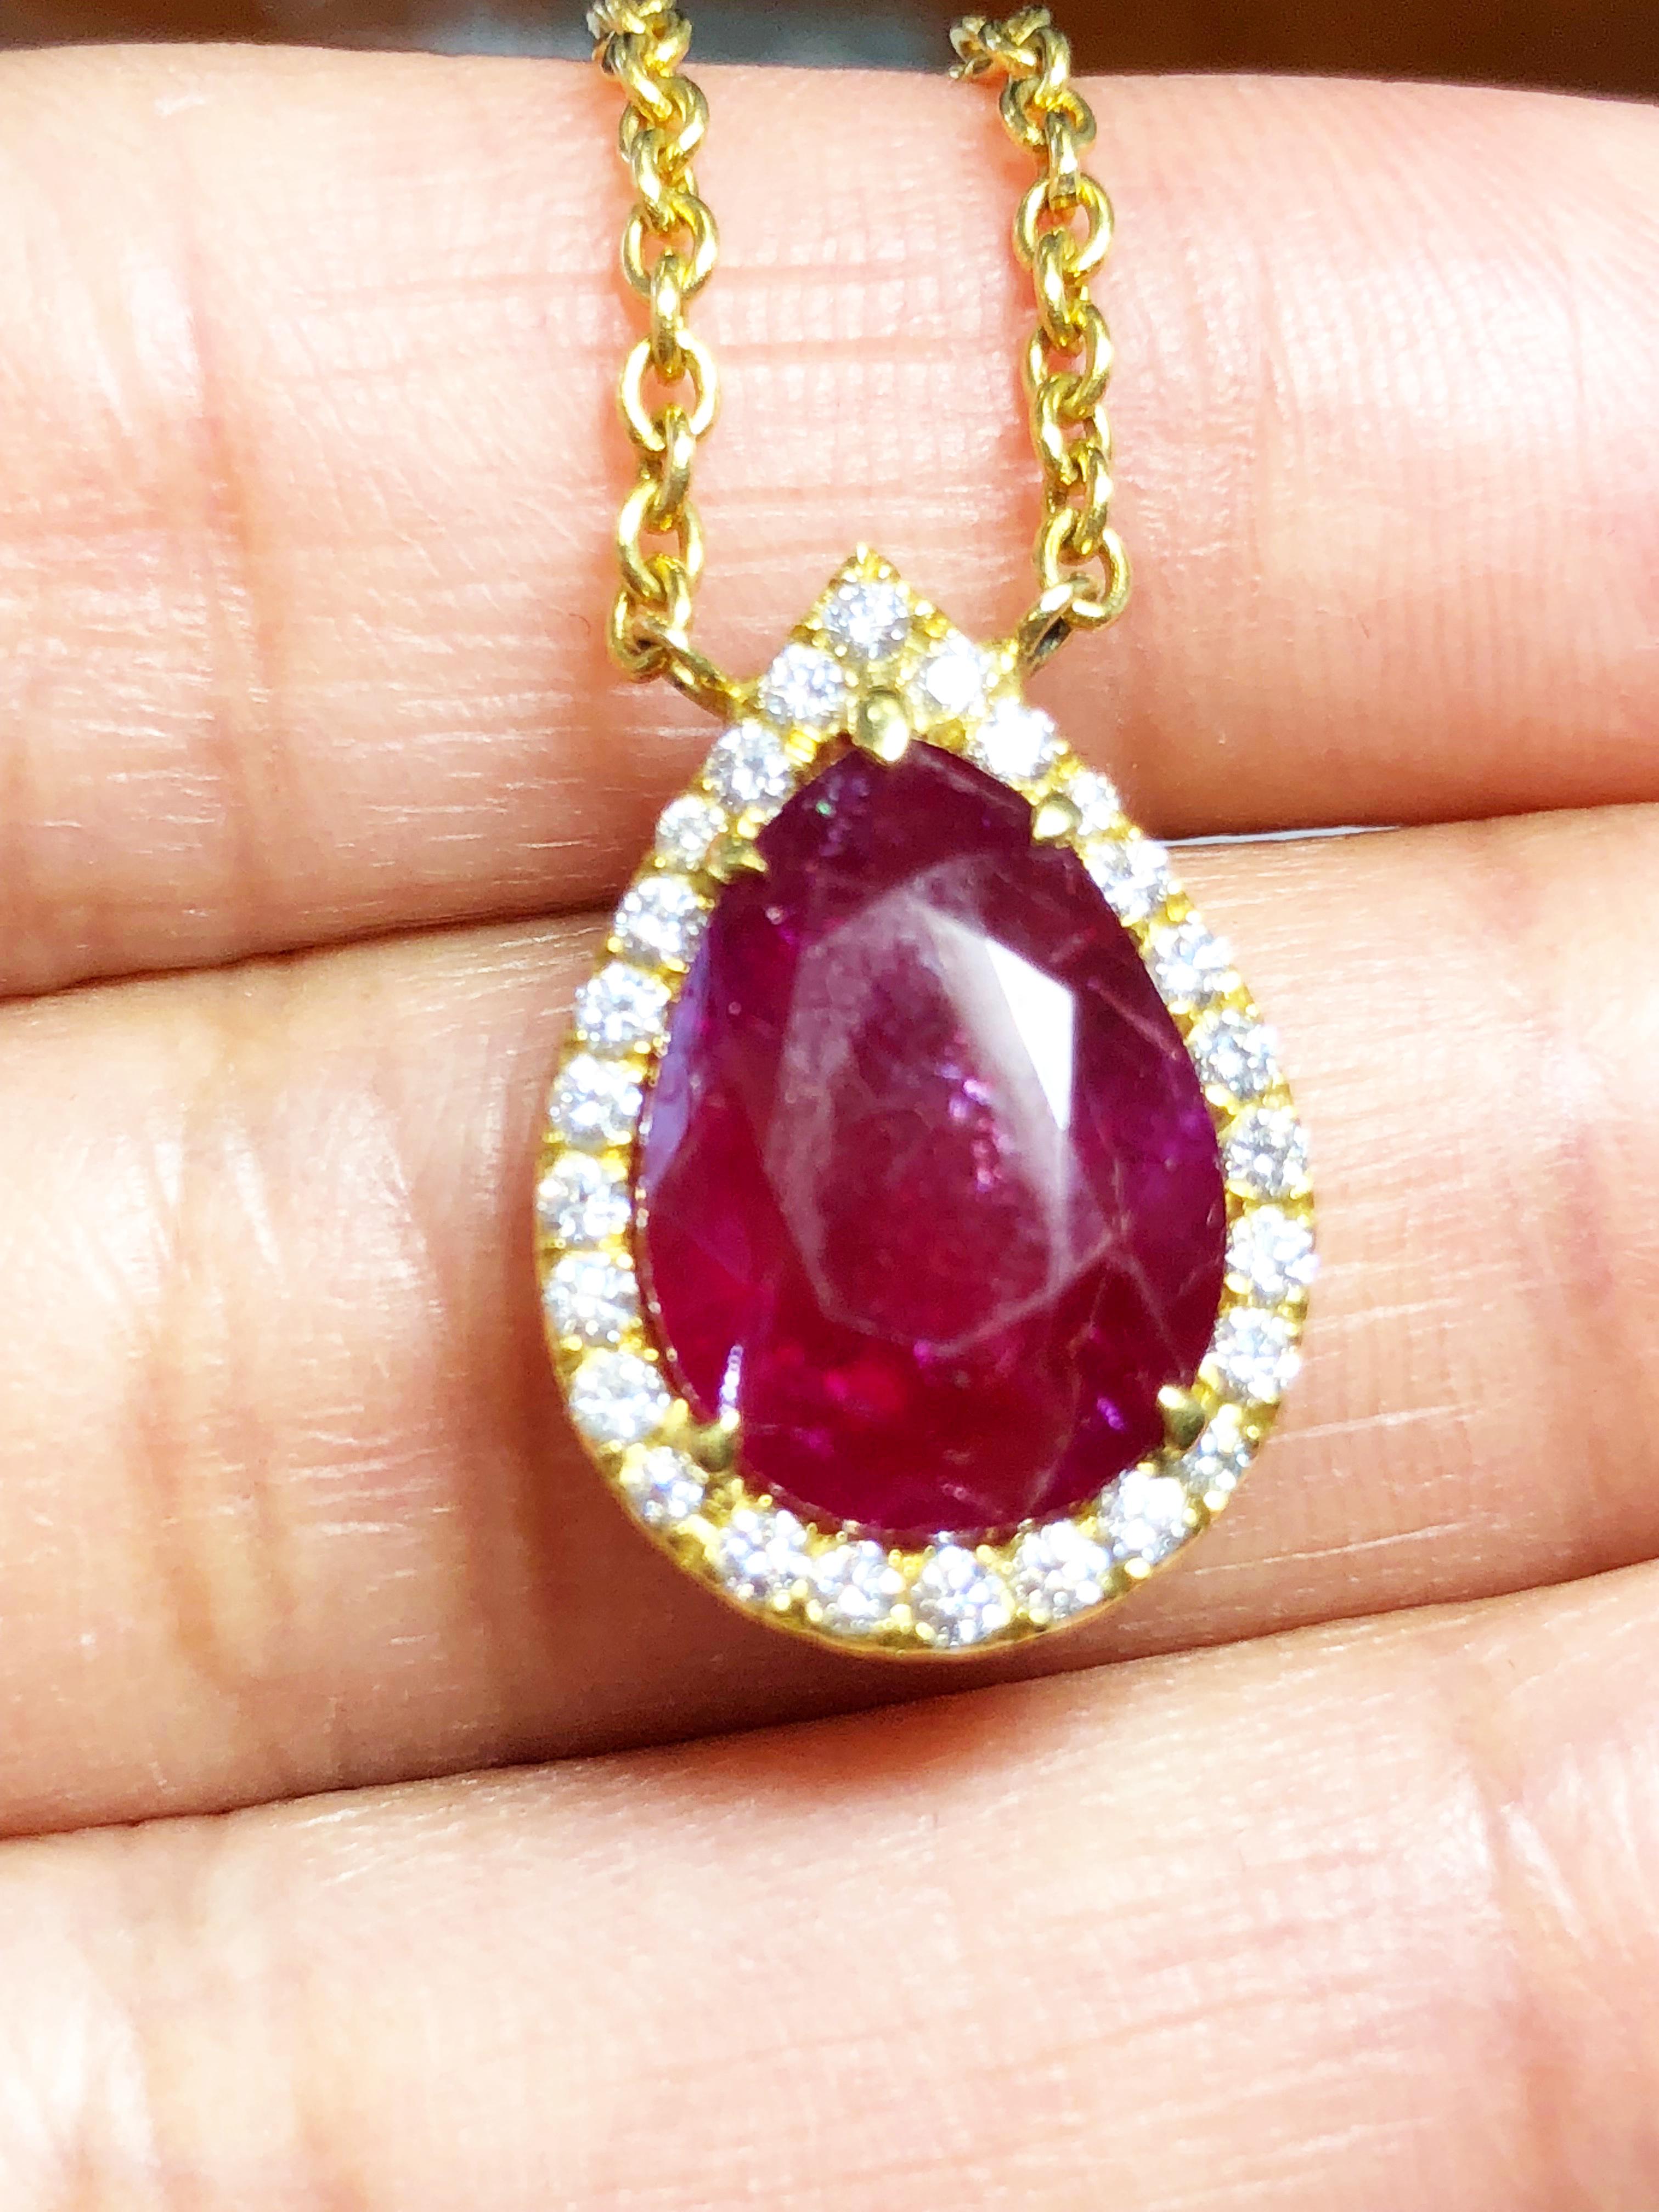 Fabulous deep red unheated 6.17 carat Burma ruby surrounded by white diamonds set in 18k yellow gold.  Length is 16